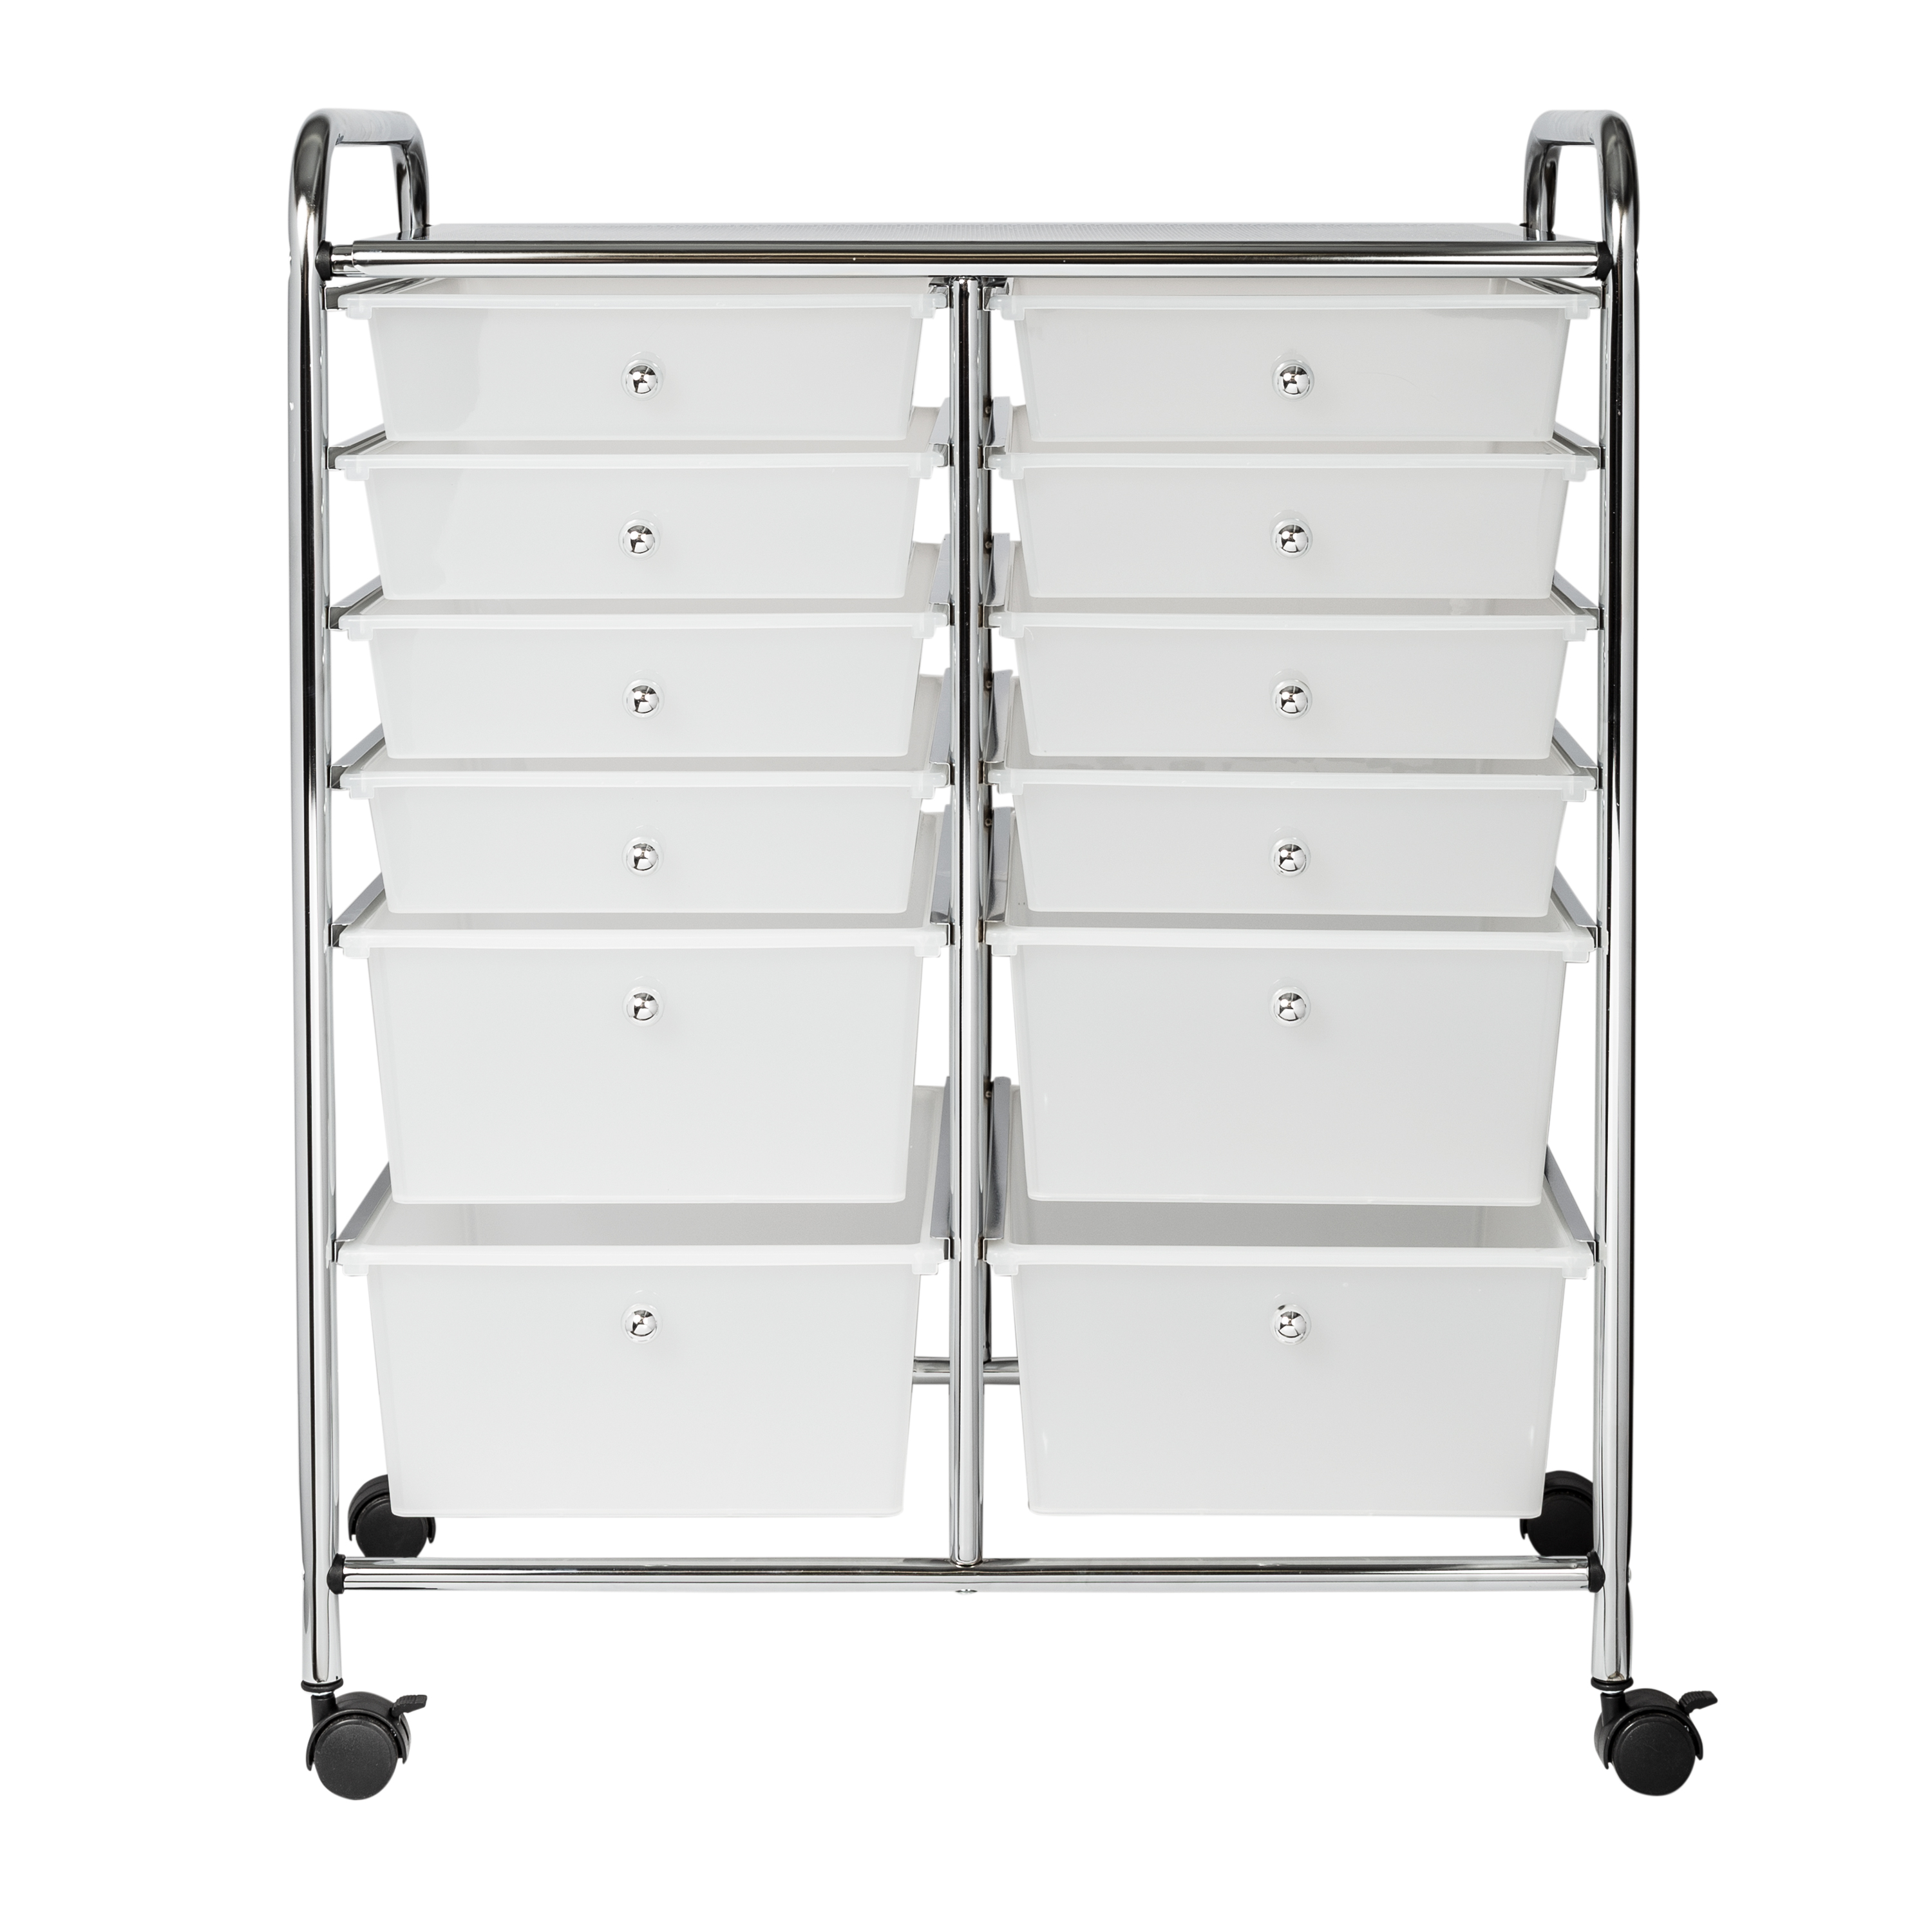 Honey-Can-Do 6 Tier Rolling 12 Plastic Drawer Storage Cart and Craft Organizer with Lockable Wheels, Clear/Chrome - image 7 of 9